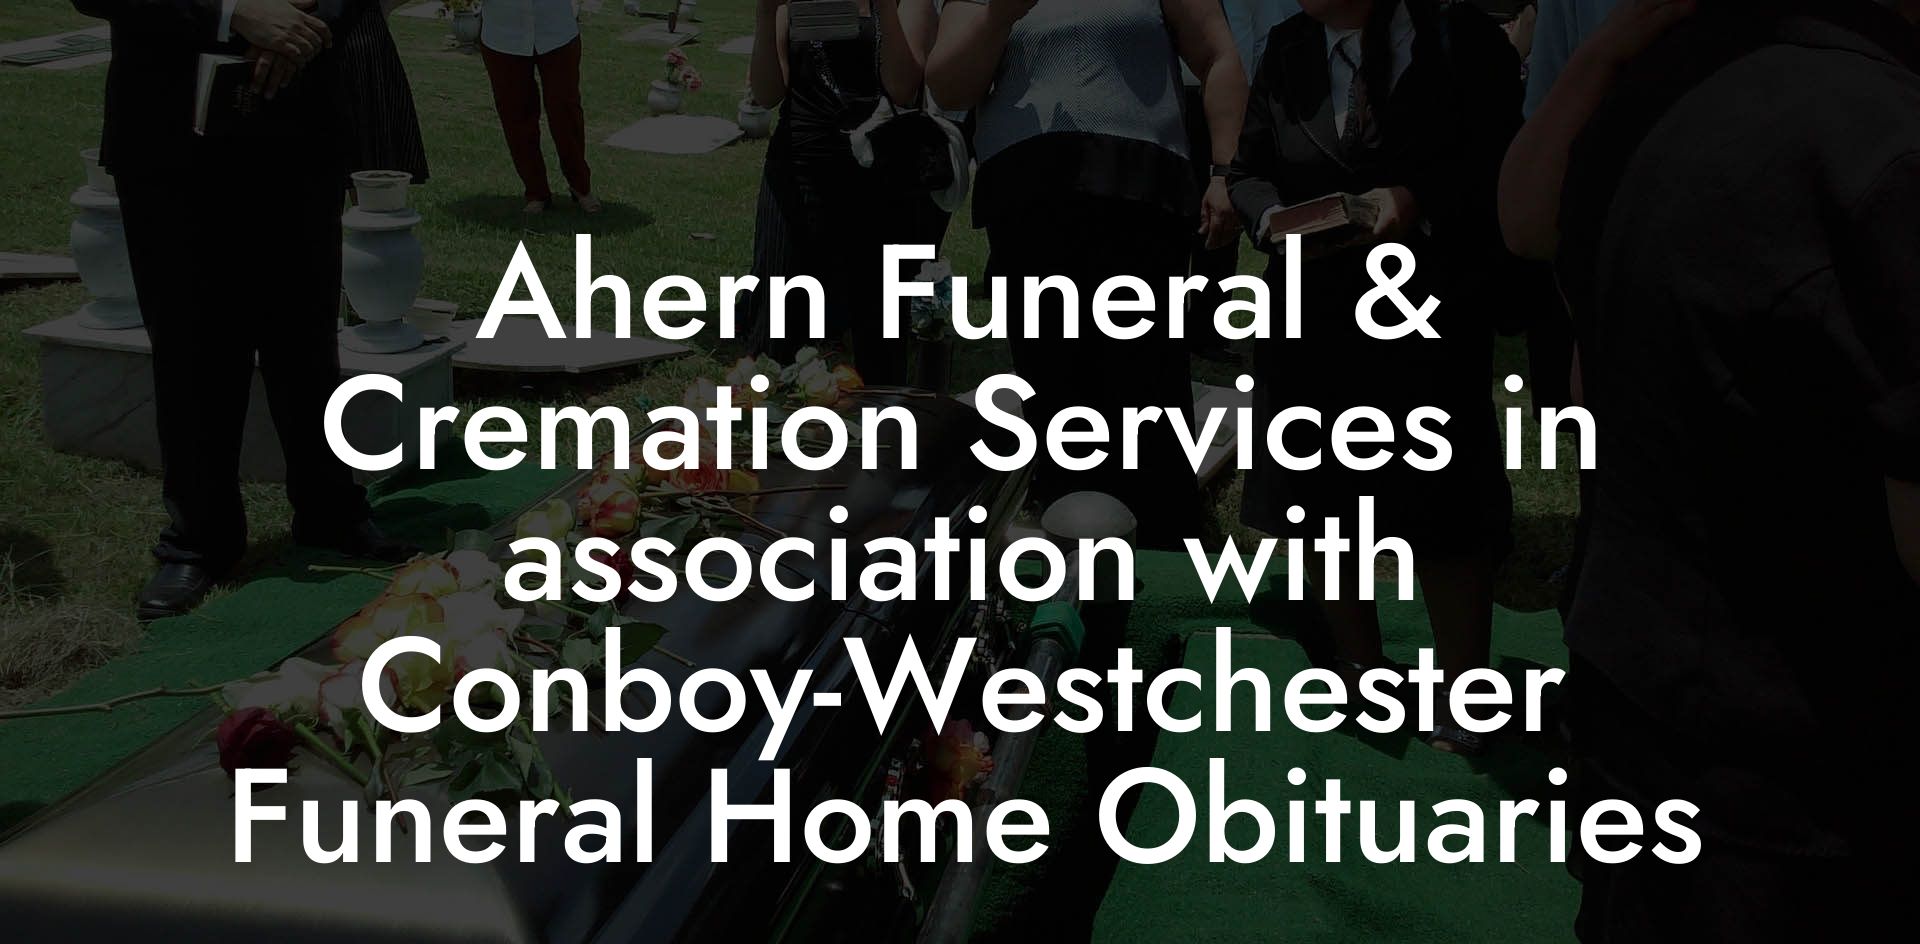 Ahern Funeral & Cremation Services in association with Conboy-Westchester Funeral Home Obituaries